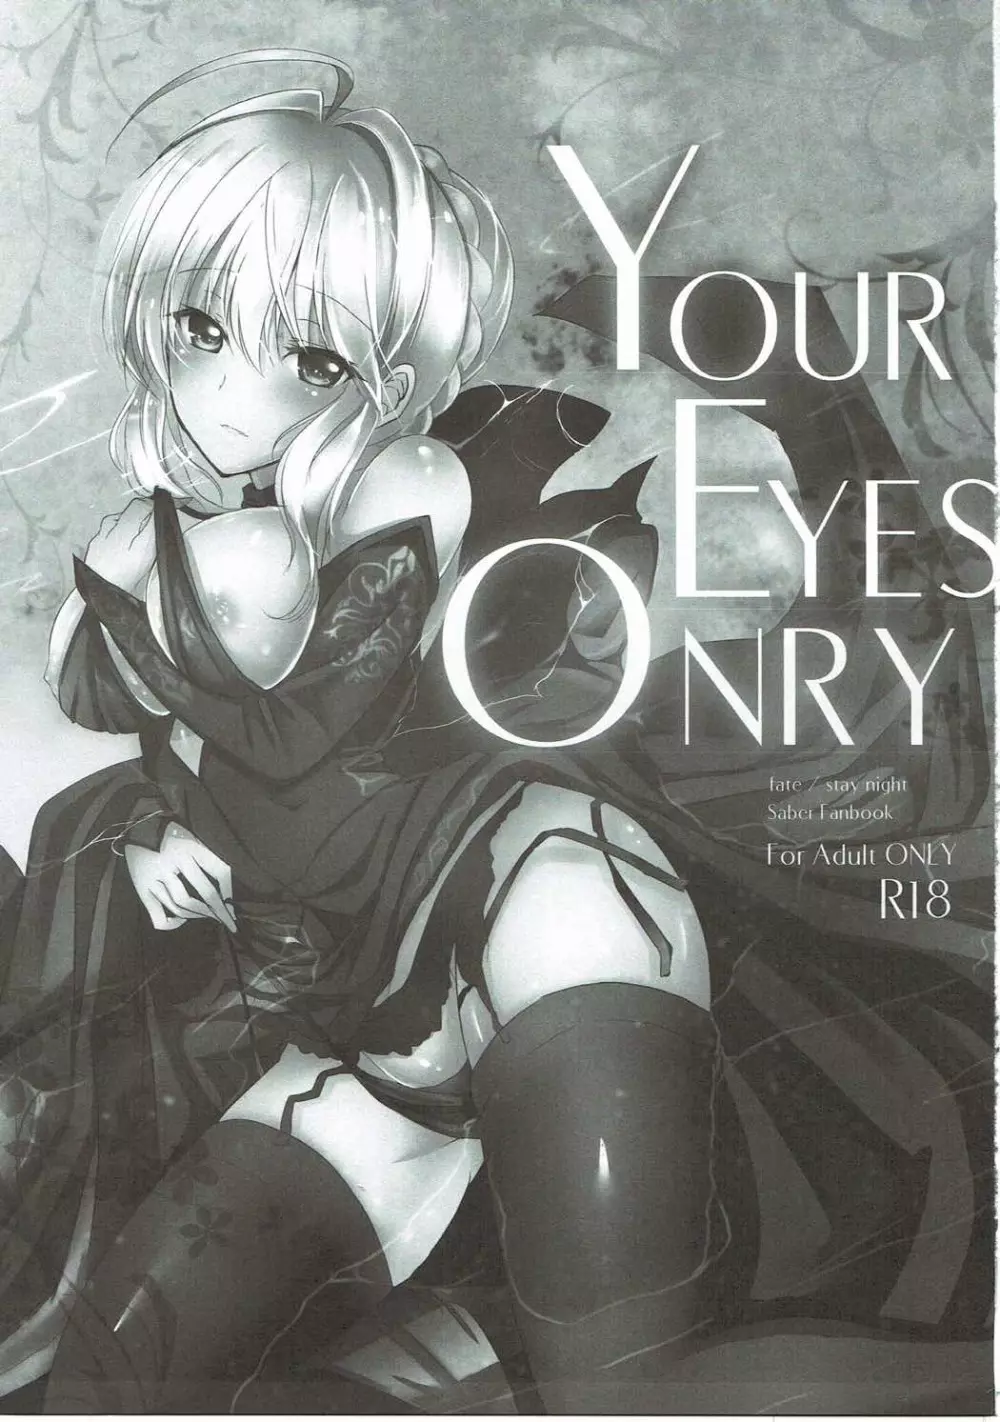 YOUR EYES ONRY Page.2